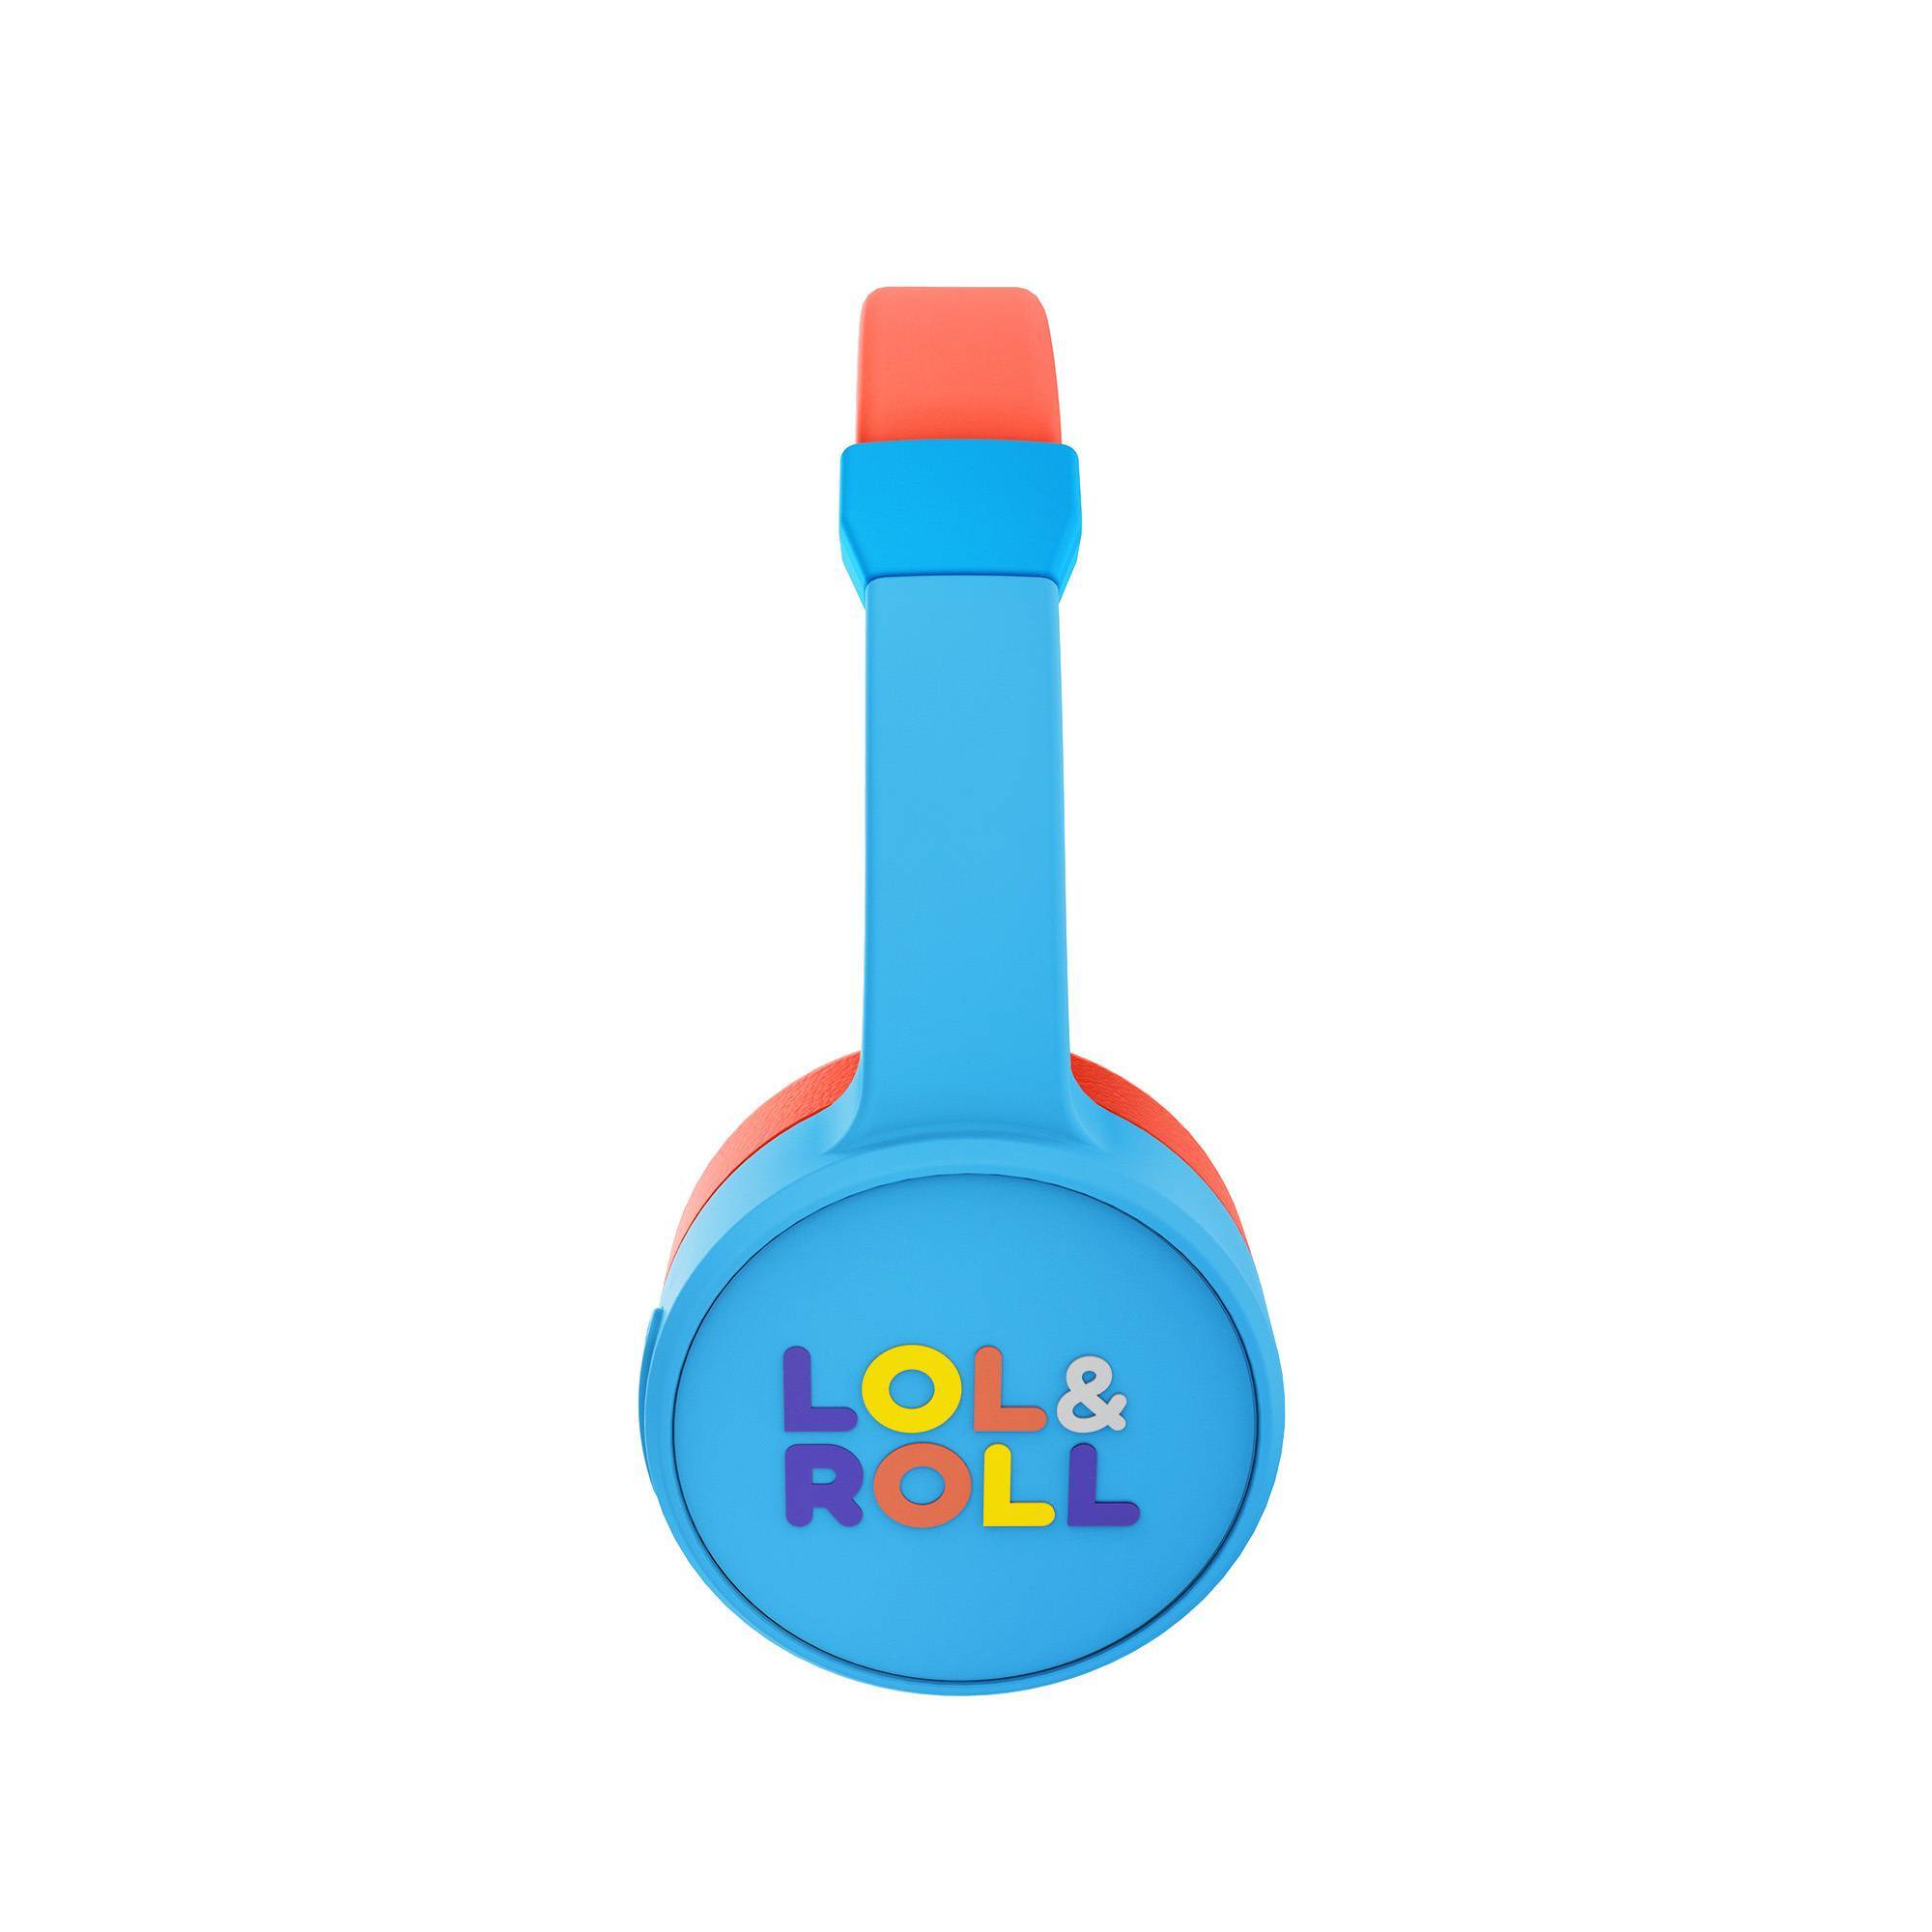 Lol&Roll Pop headset for kids with built-in microphone